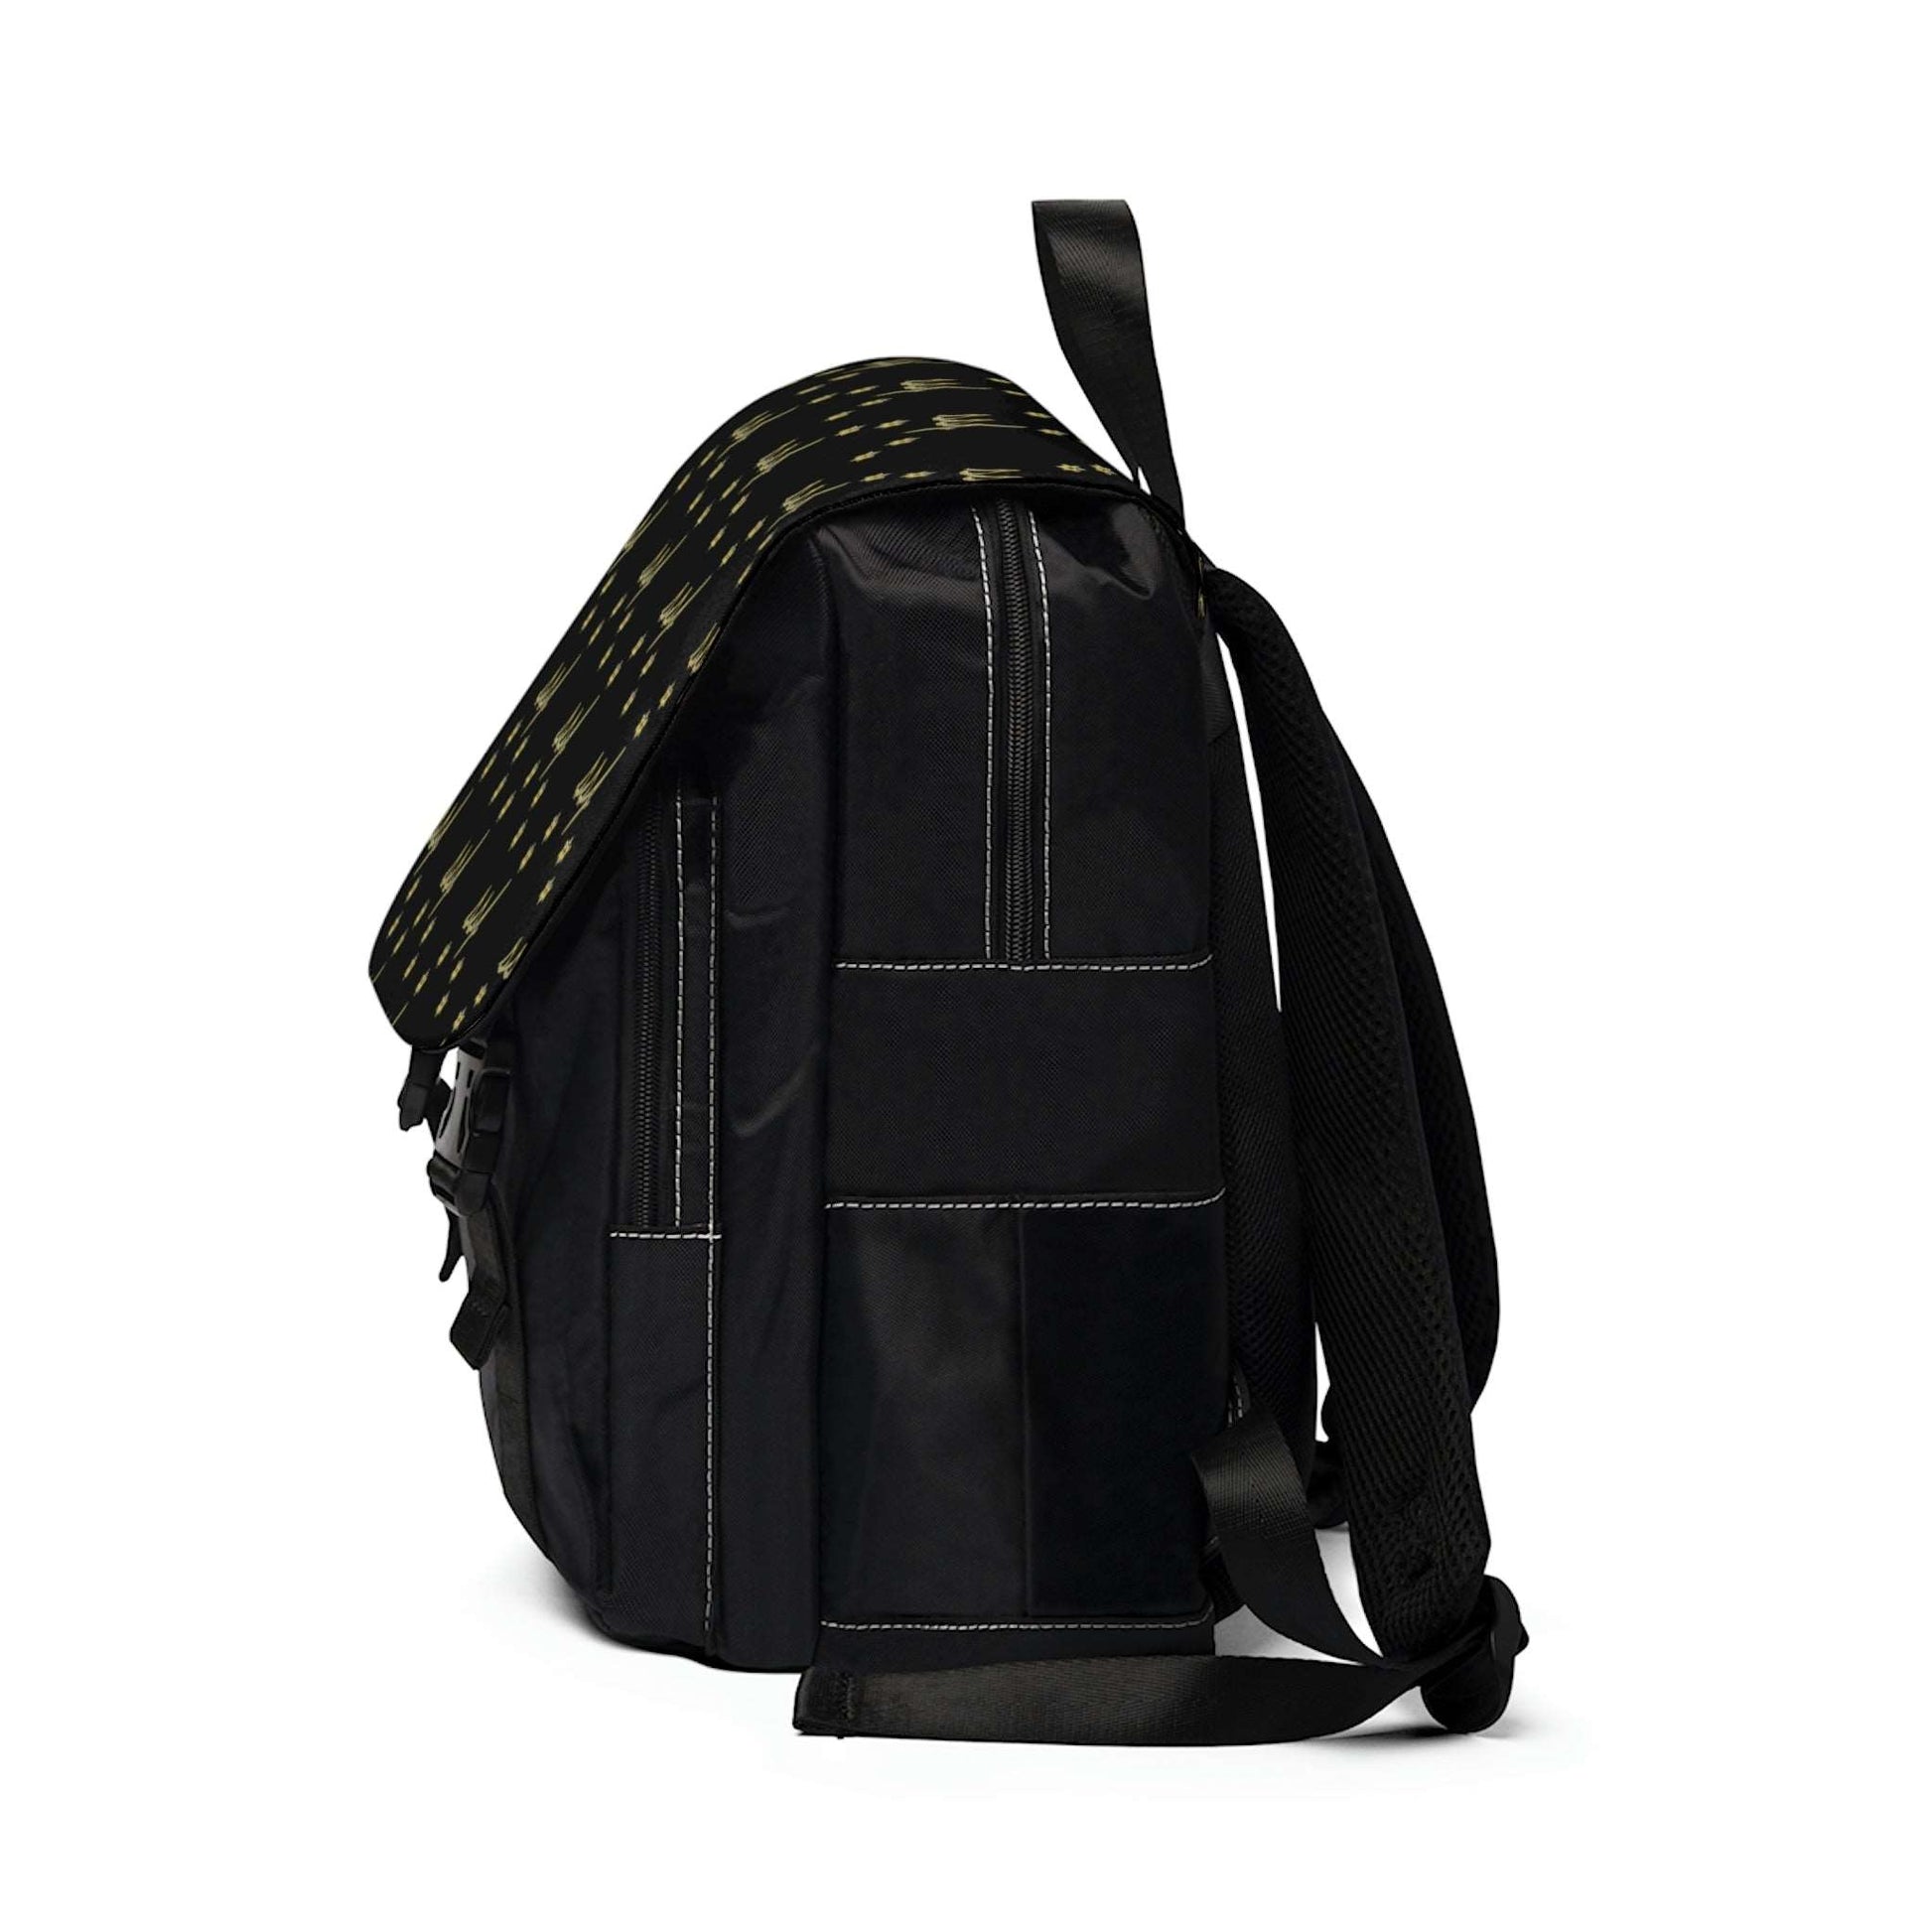 SSF Backpack in Gold